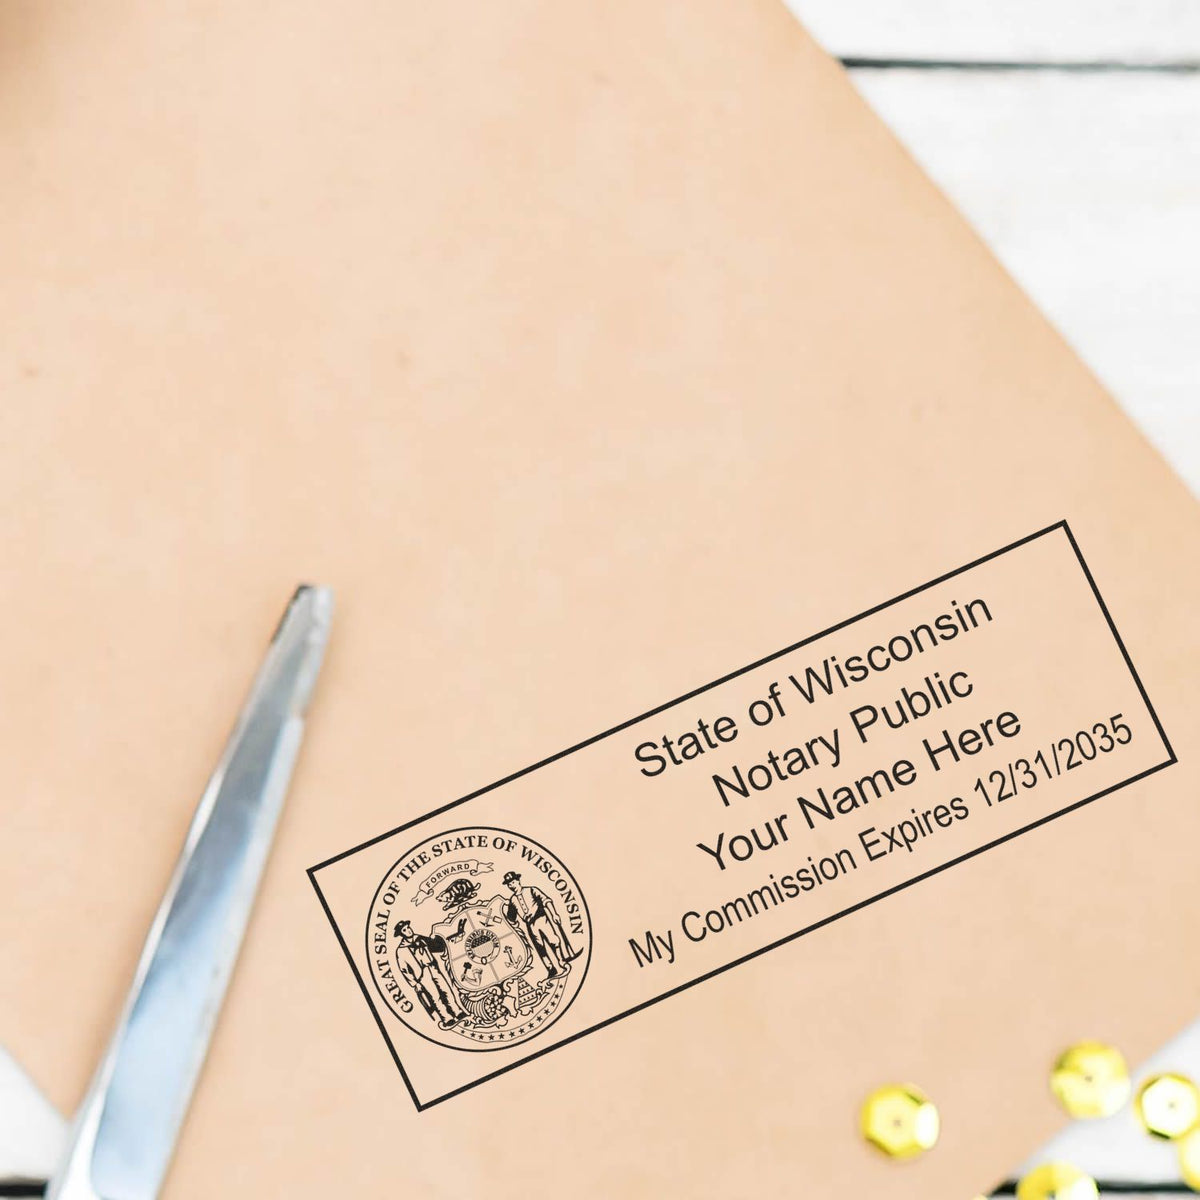 A lifestyle photo showing a stamped image of the Heavy-Duty Wisconsin Rectangular Notary Stamp on a piece of paper